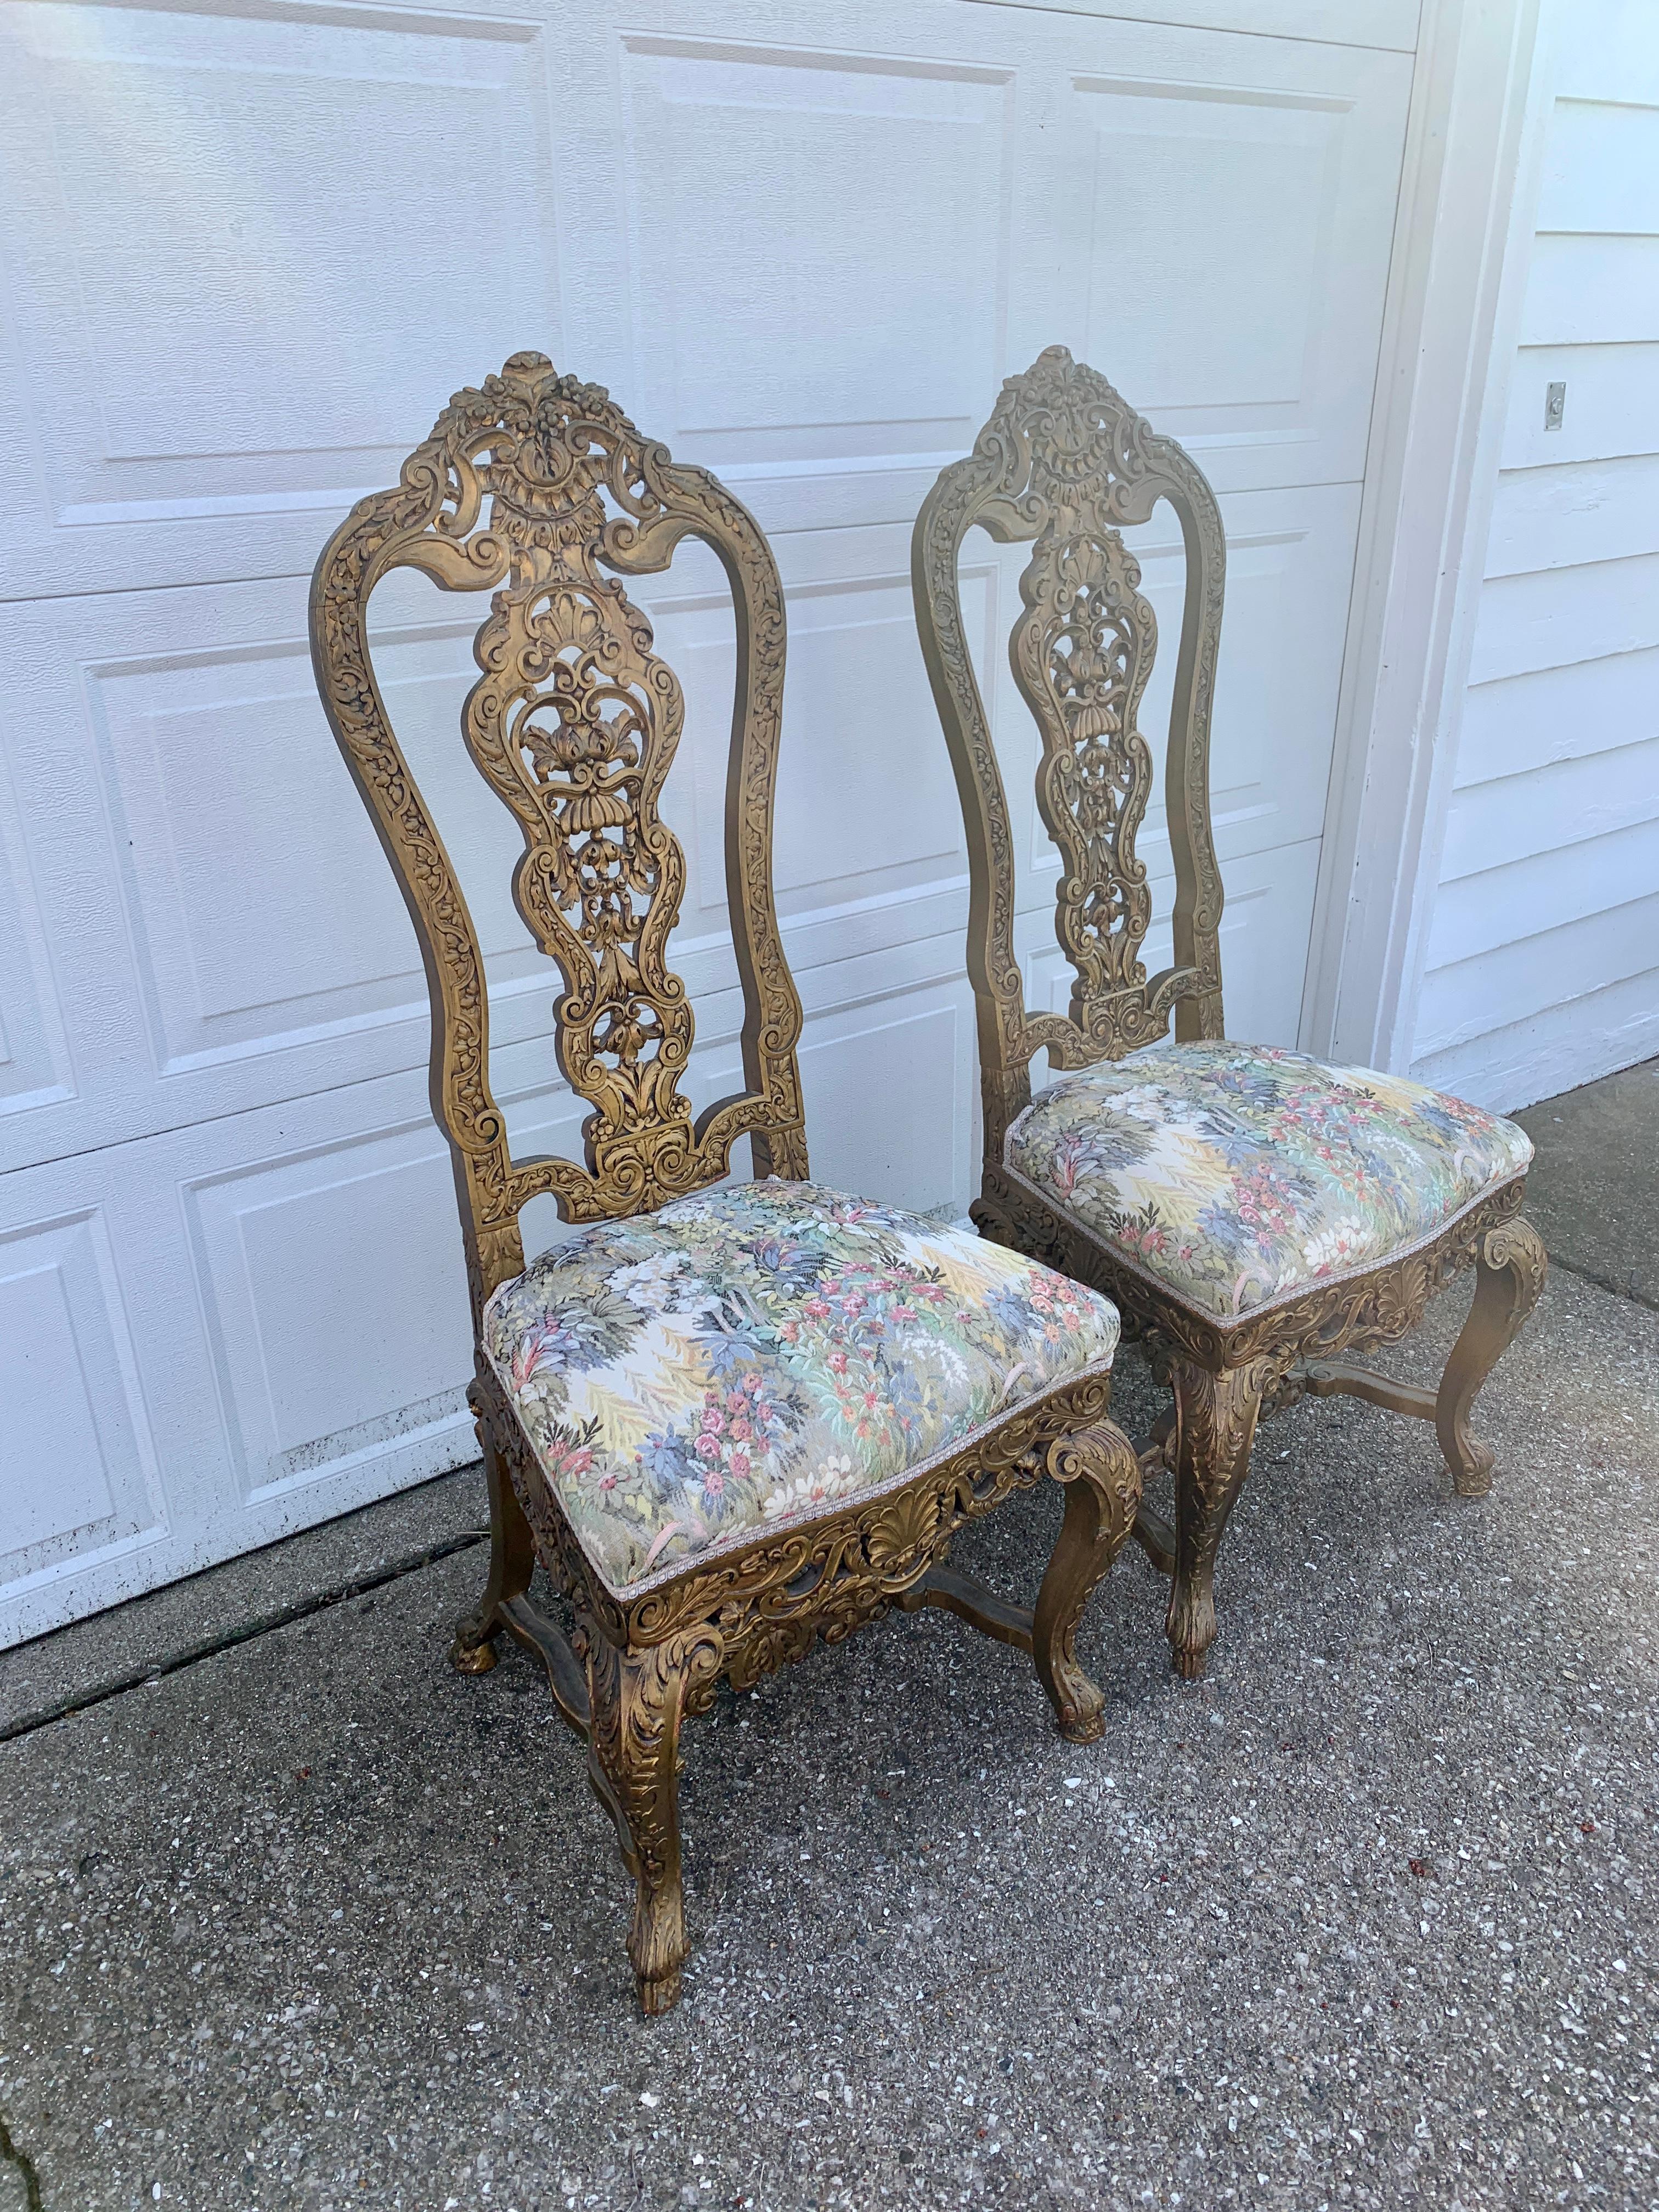 Italian 19th Century Antique Venetian Carved Gold Giltwood Throne Chairs, Pair For Sale